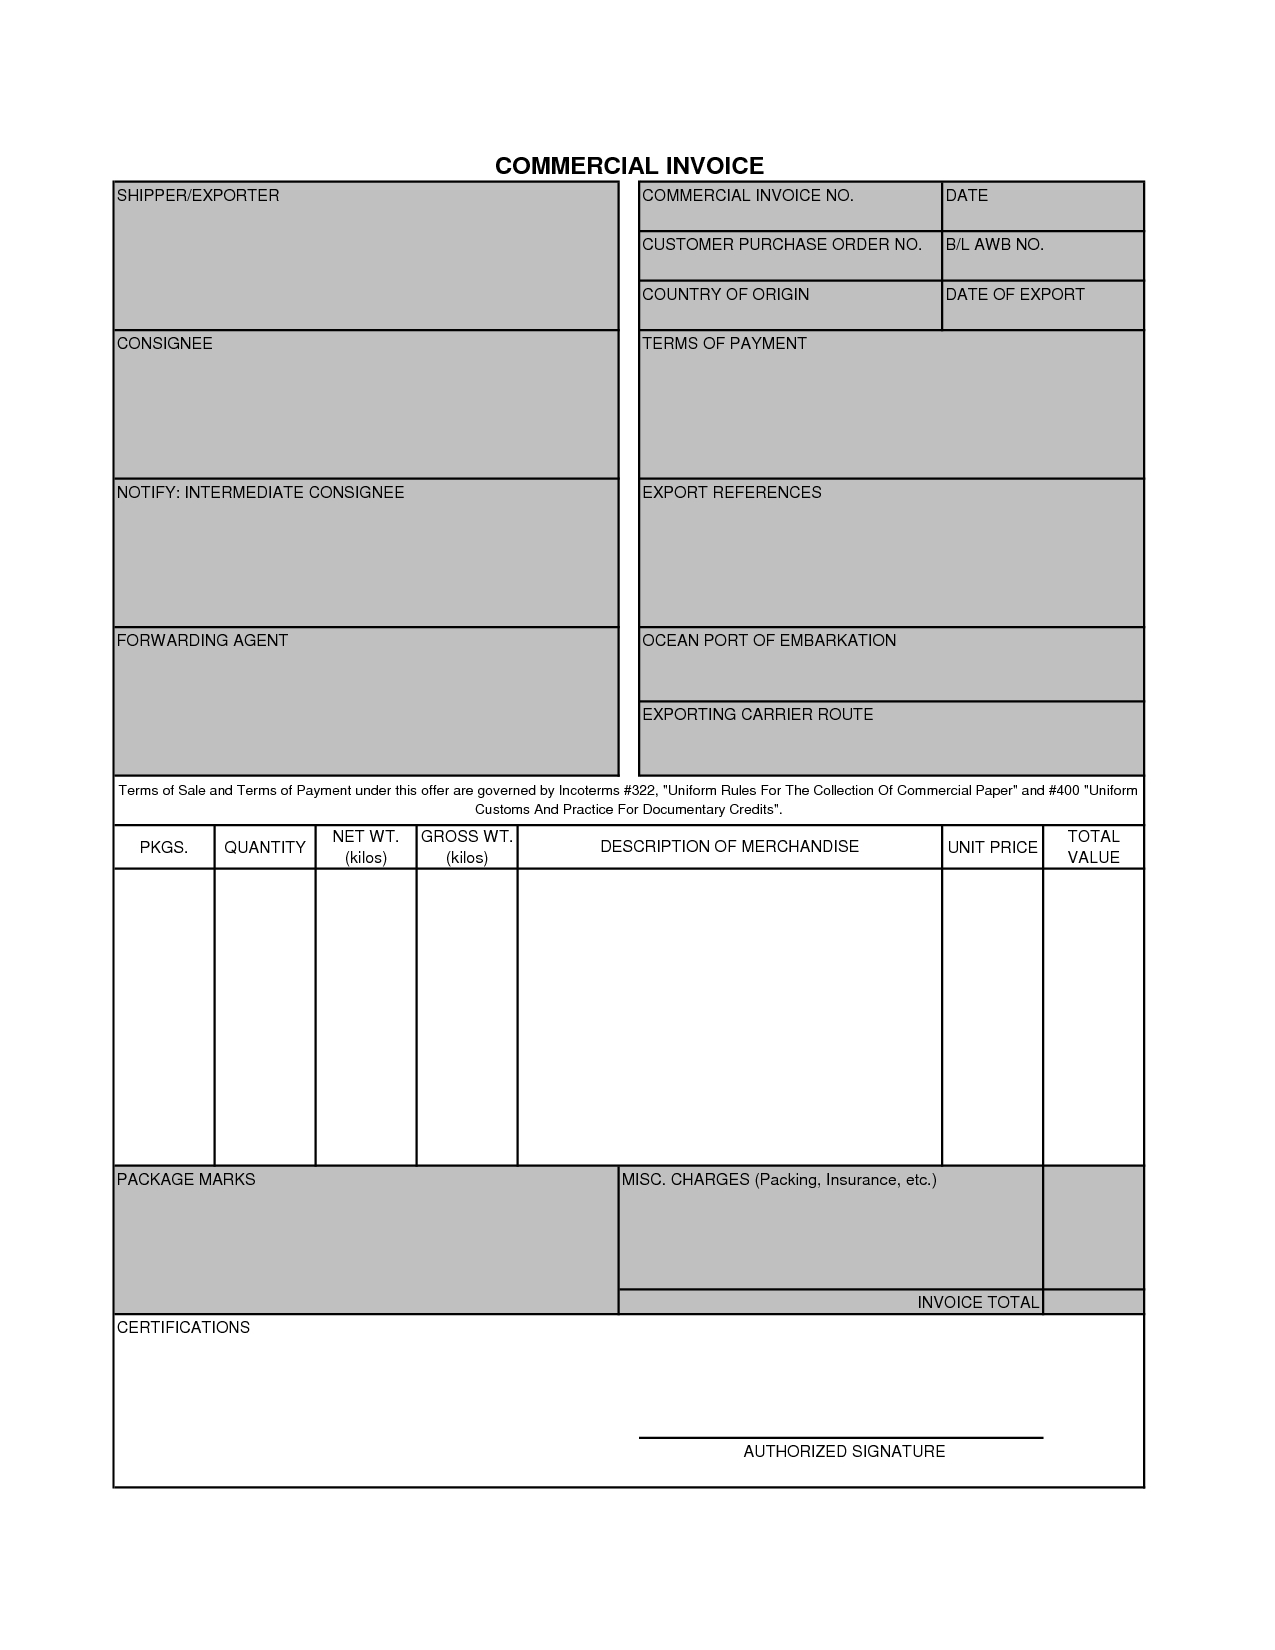 17 best photos of commercial invoice template free commercial commercial invoice blank